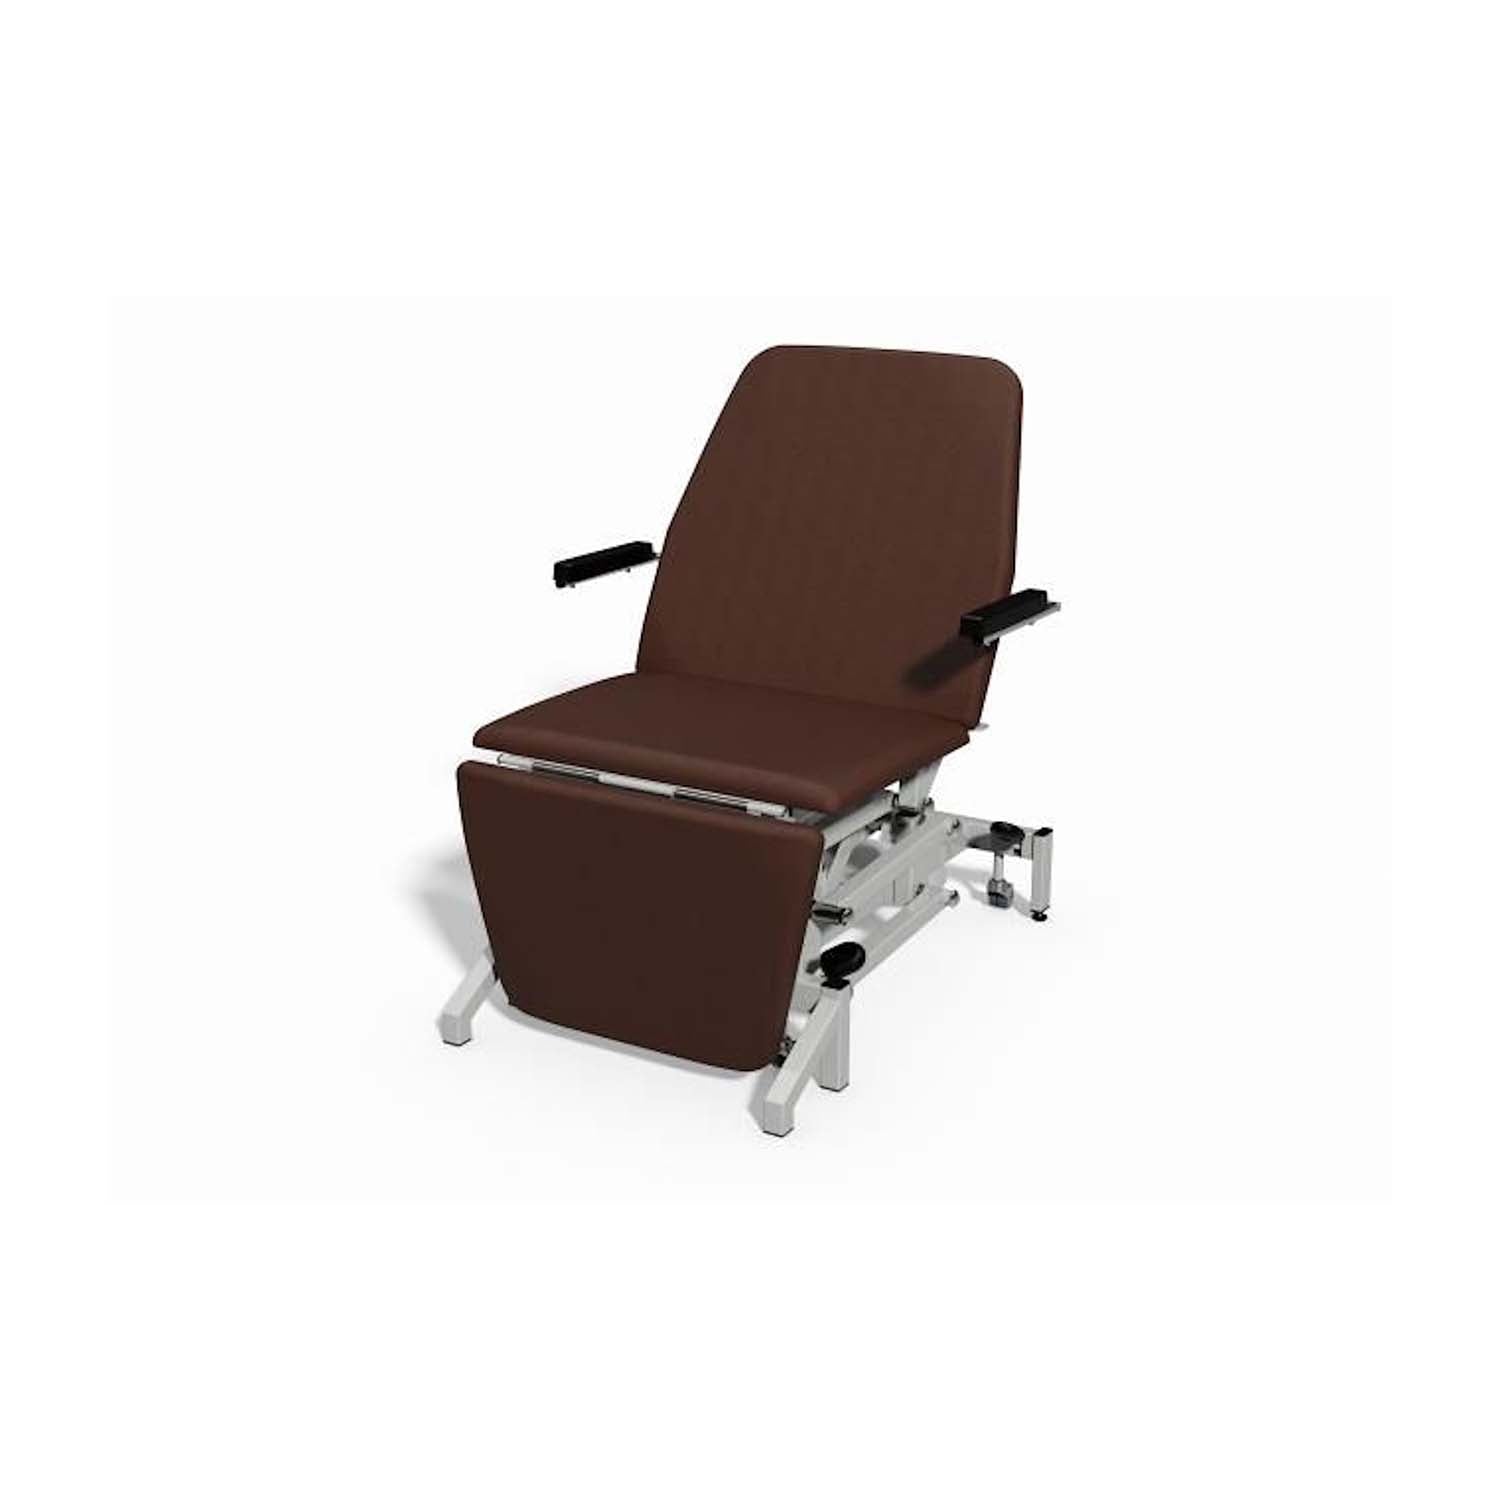 Plinth 2000 Model 50CT Tilting Bariatric Podiatry Chair | Cocoa